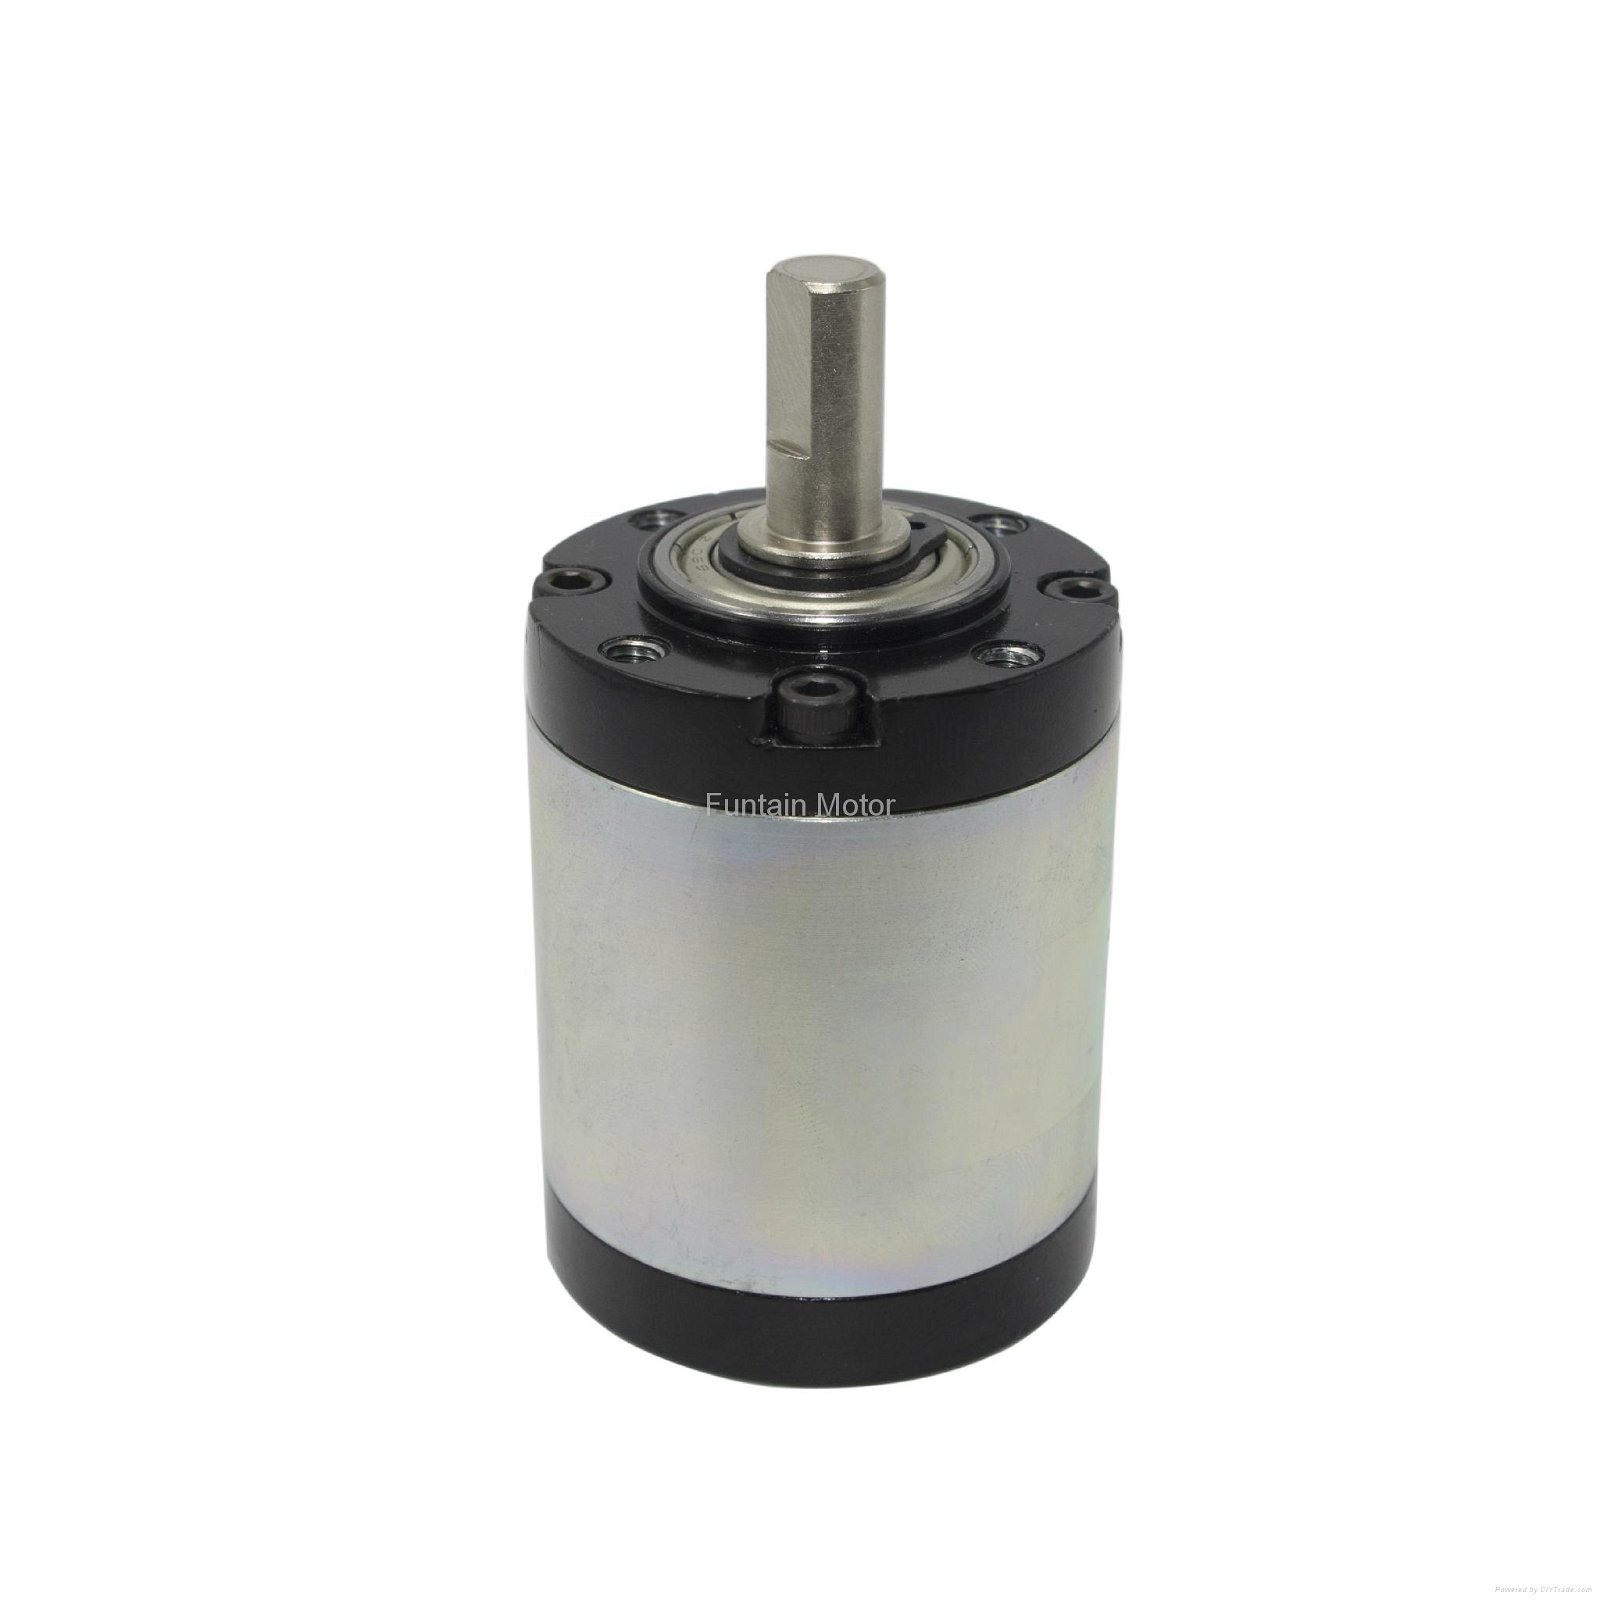 16mm-42mm planetary gearbox with brushless dc motor 4